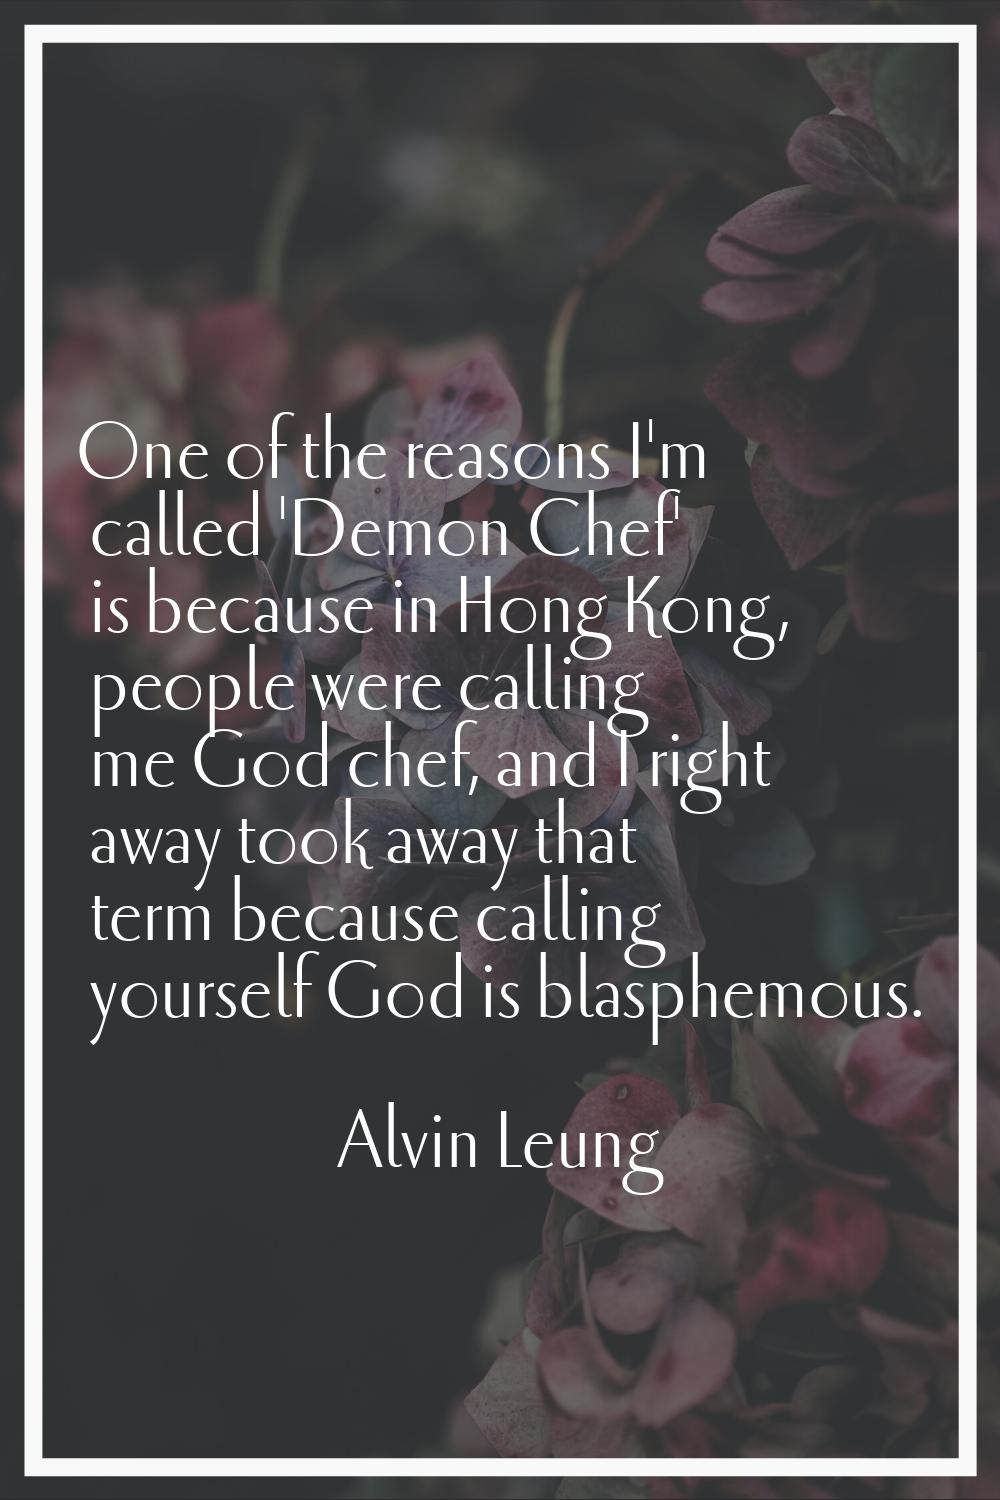 One of the reasons I'm called 'Demon Chef' is because in Hong Kong, people were calling me God chef